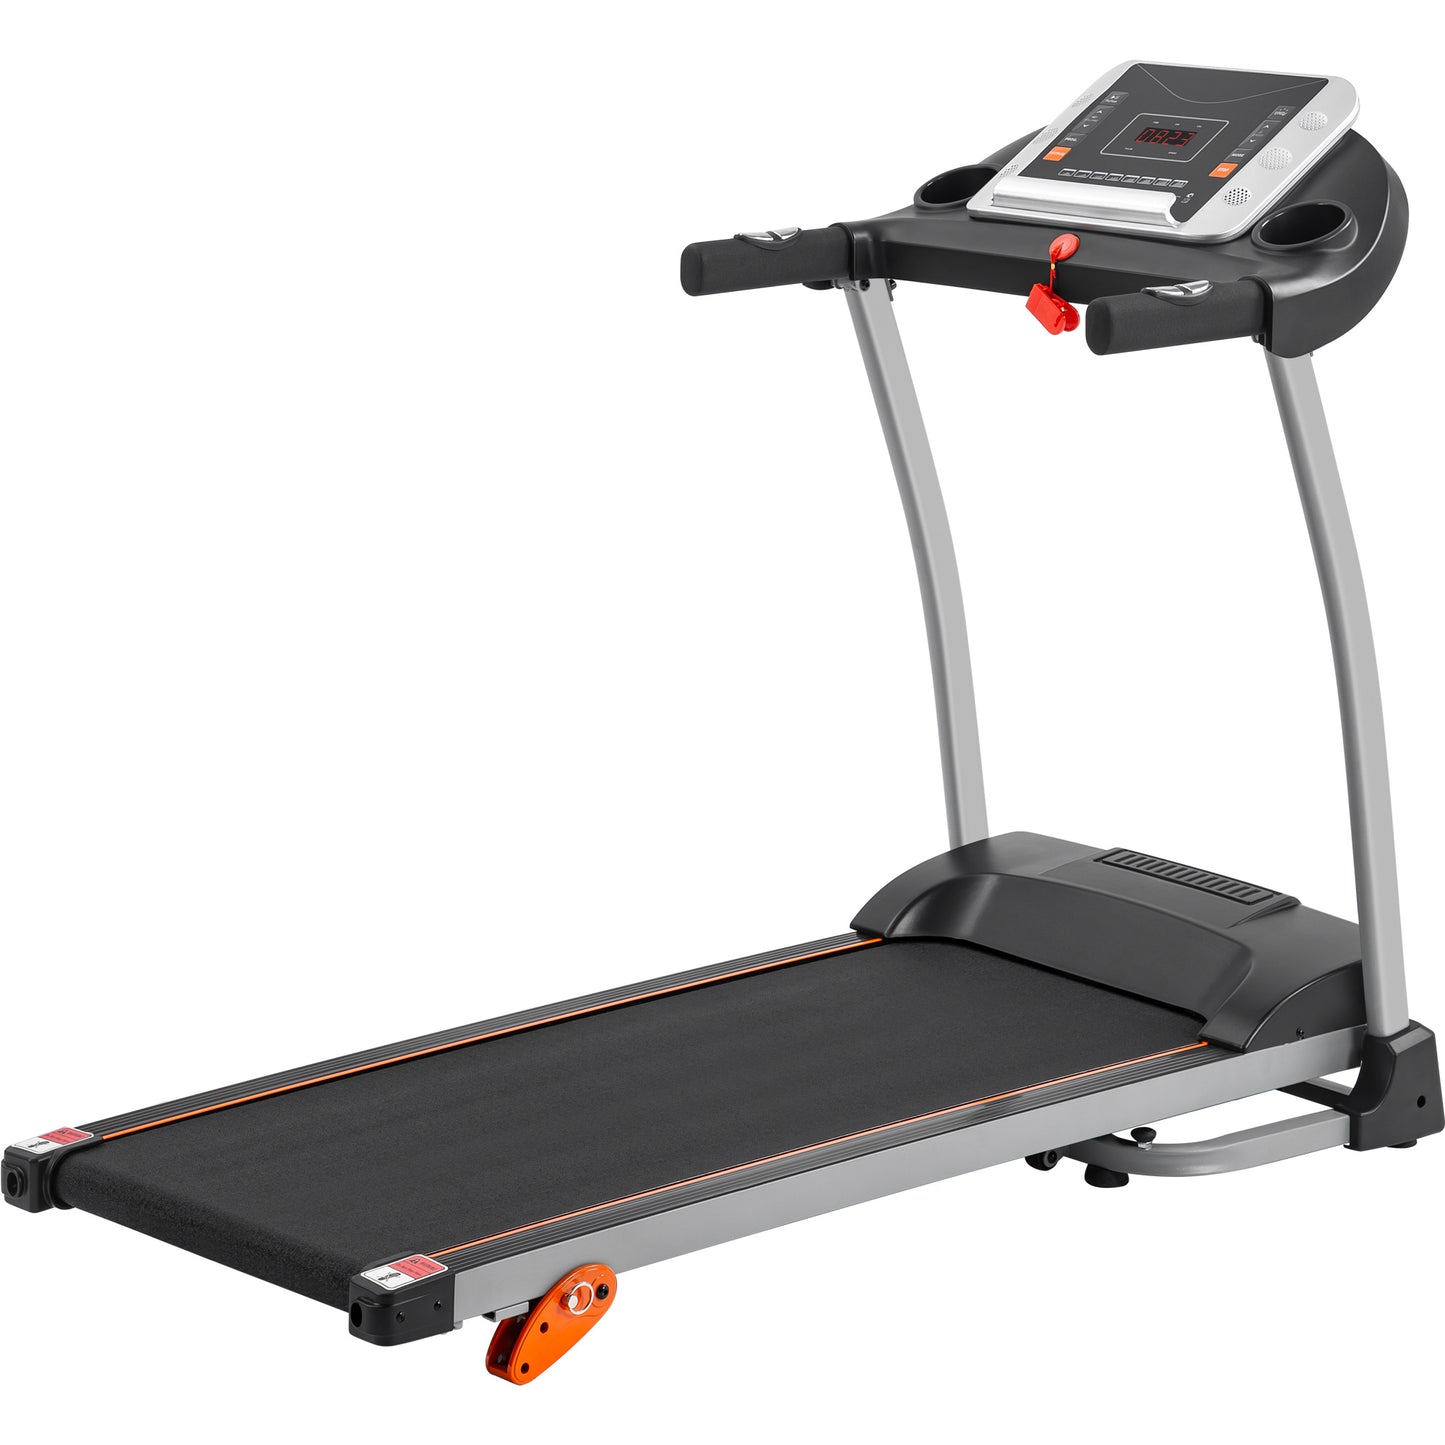 Easy Folding Treadmill for Home with Pulse Sensor, 3-Level Incline